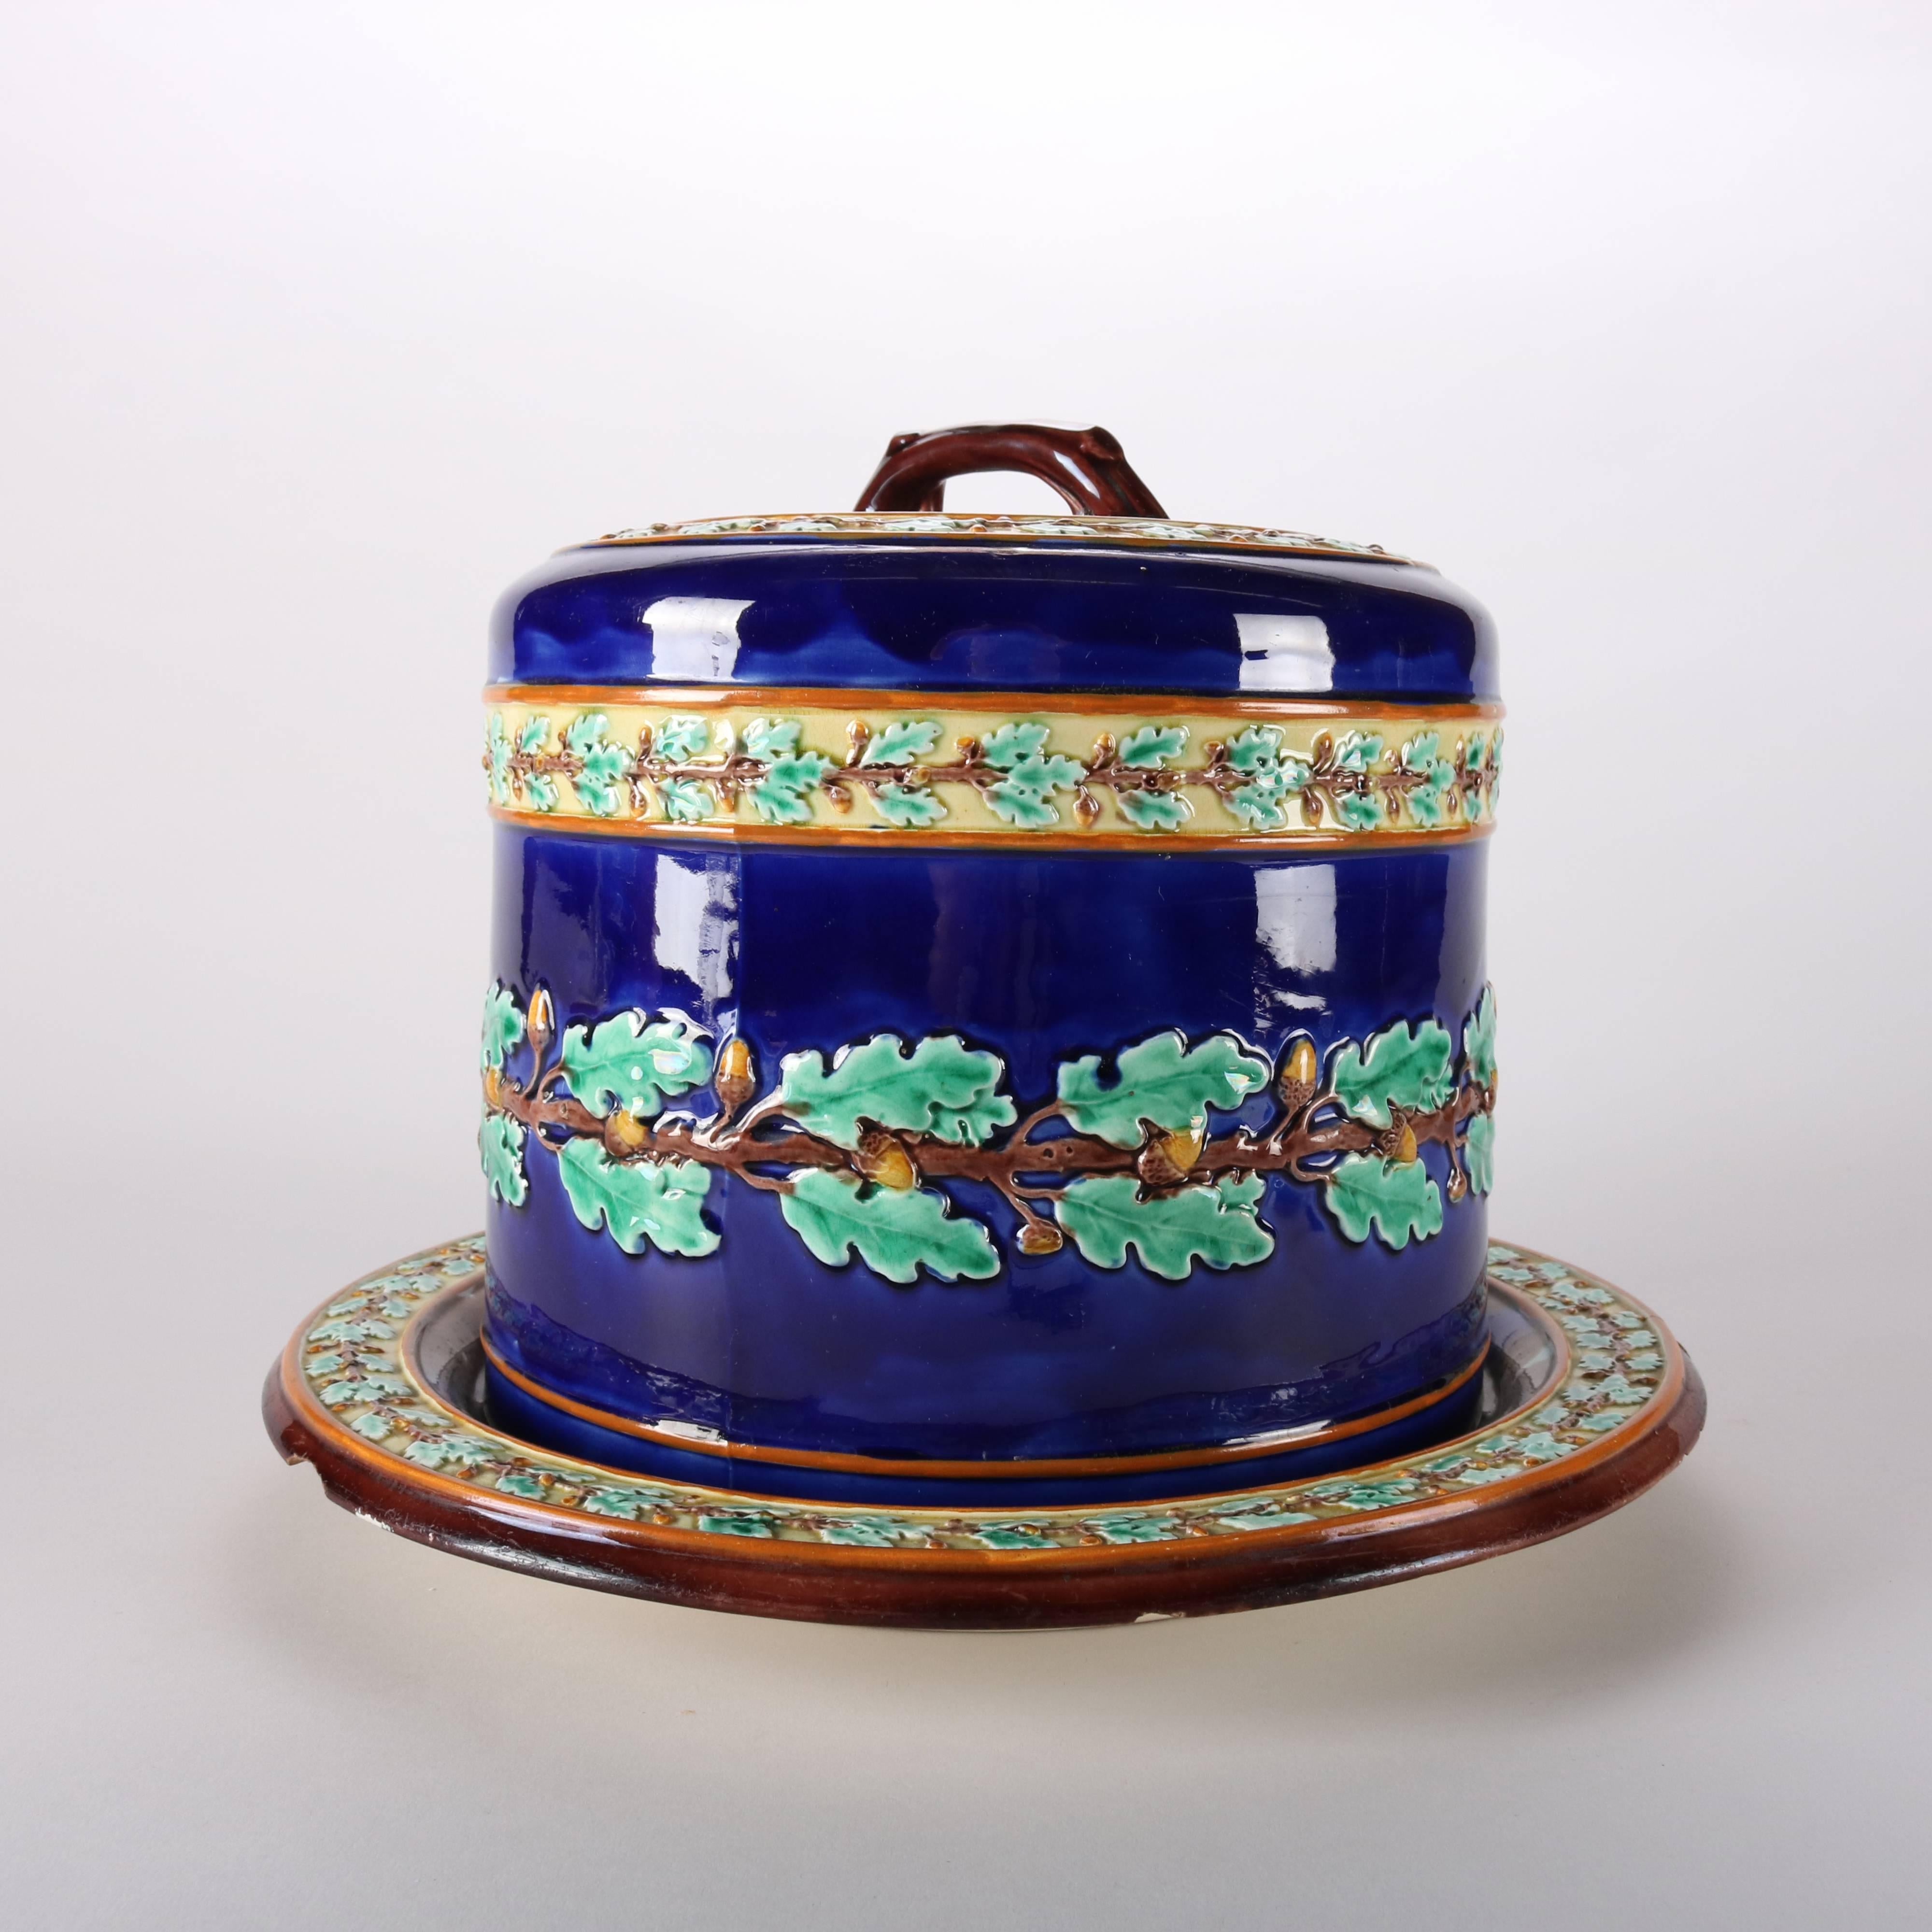 Antique English Majolica pottery cheese keeper and under plate by Wedgwood features oak leaf and acorn pattern on cobalt blue ground, maker mark on base, 20th century.

Measures: 9.5